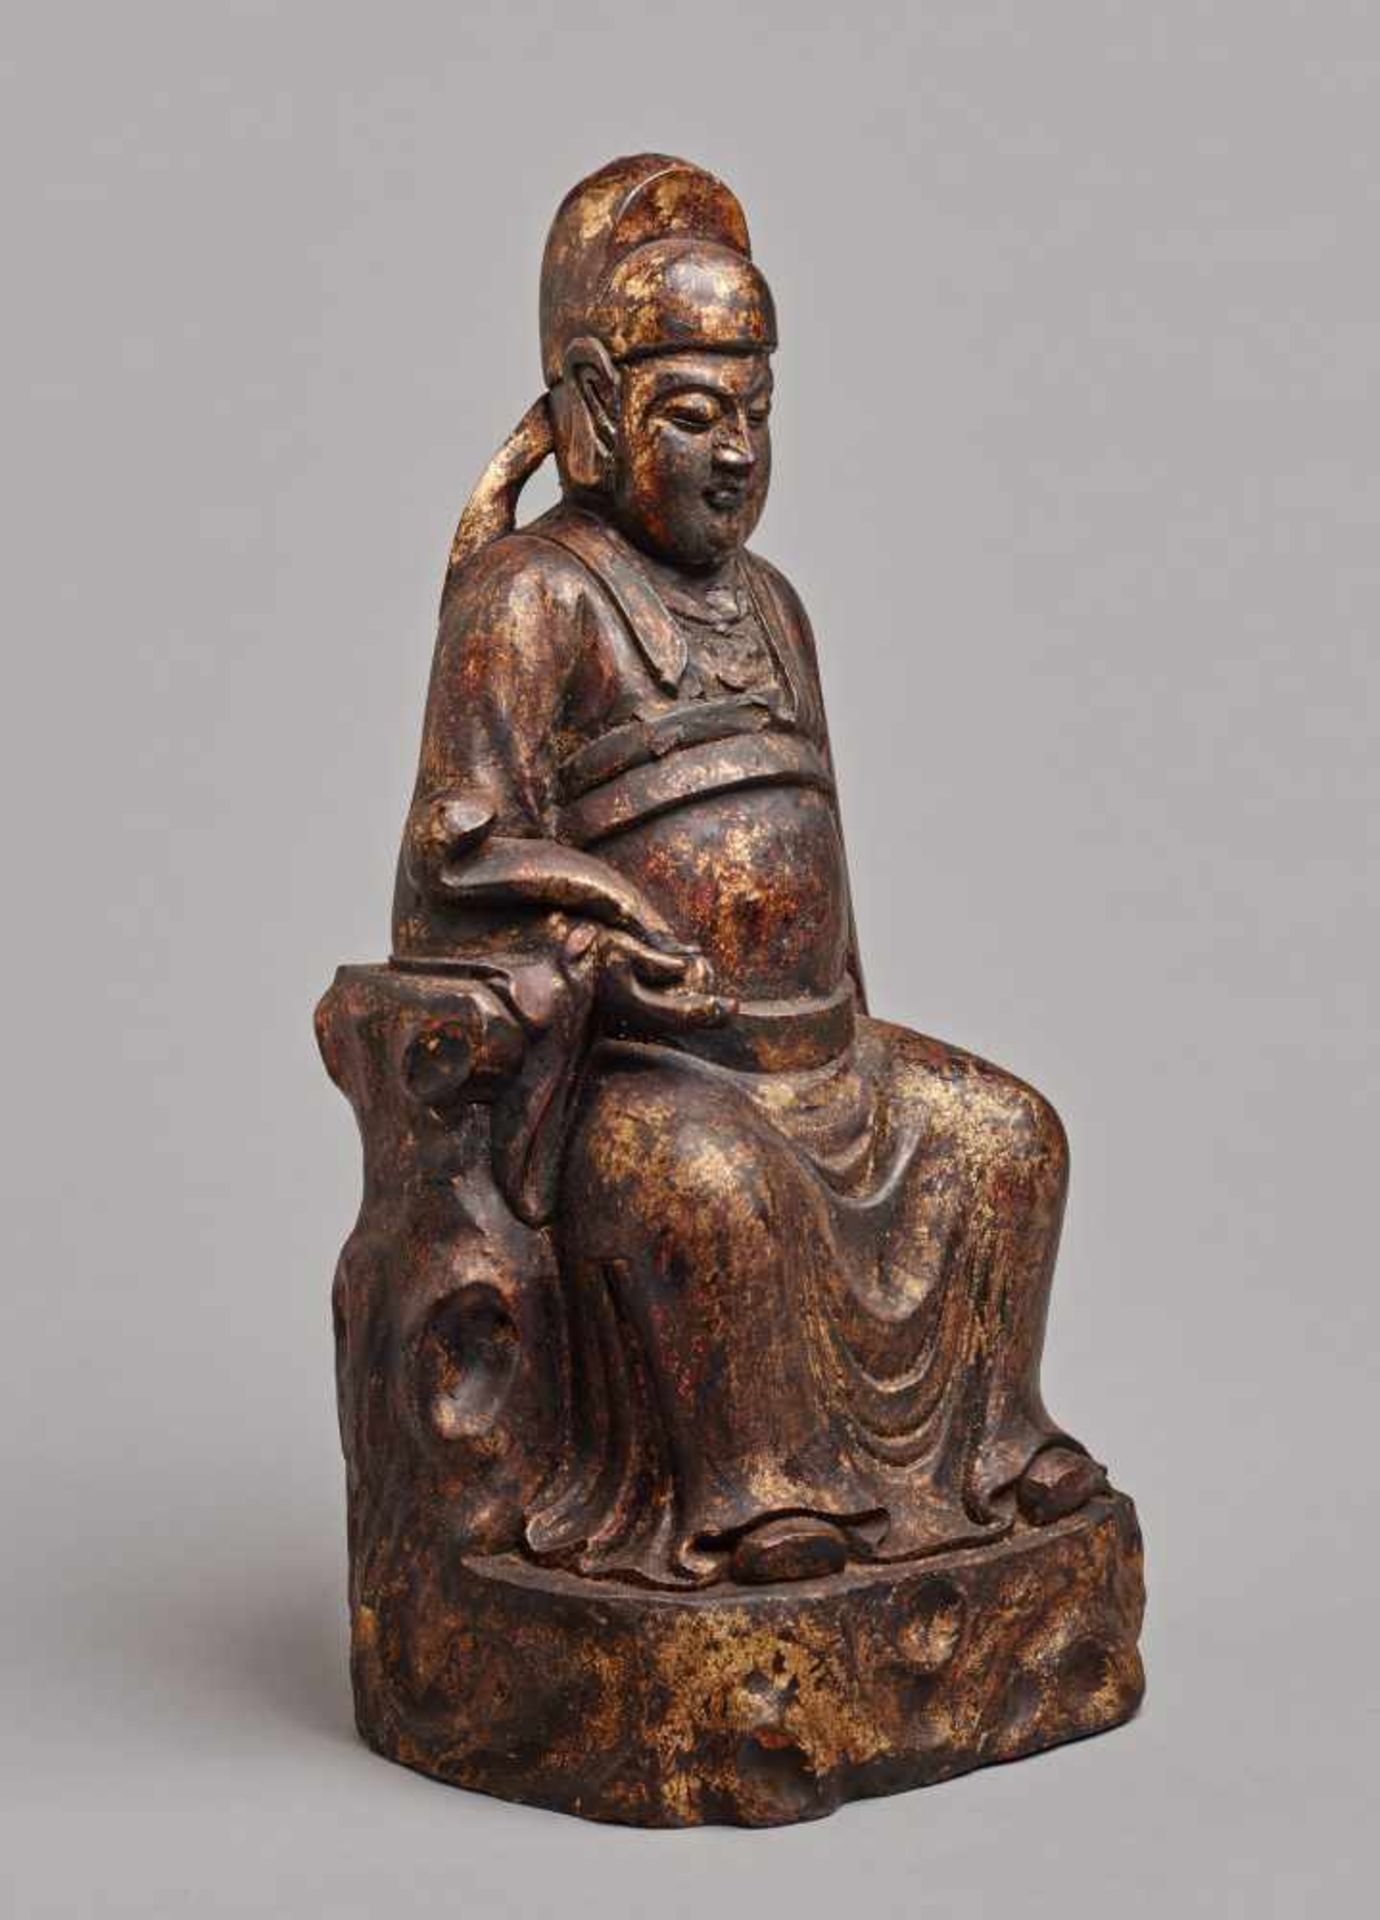 DEIFIED HIGH OFFICIALWood with gildingChina, Qing dynasty (1644-1912) A decorative sculpture of a - Image 2 of 4